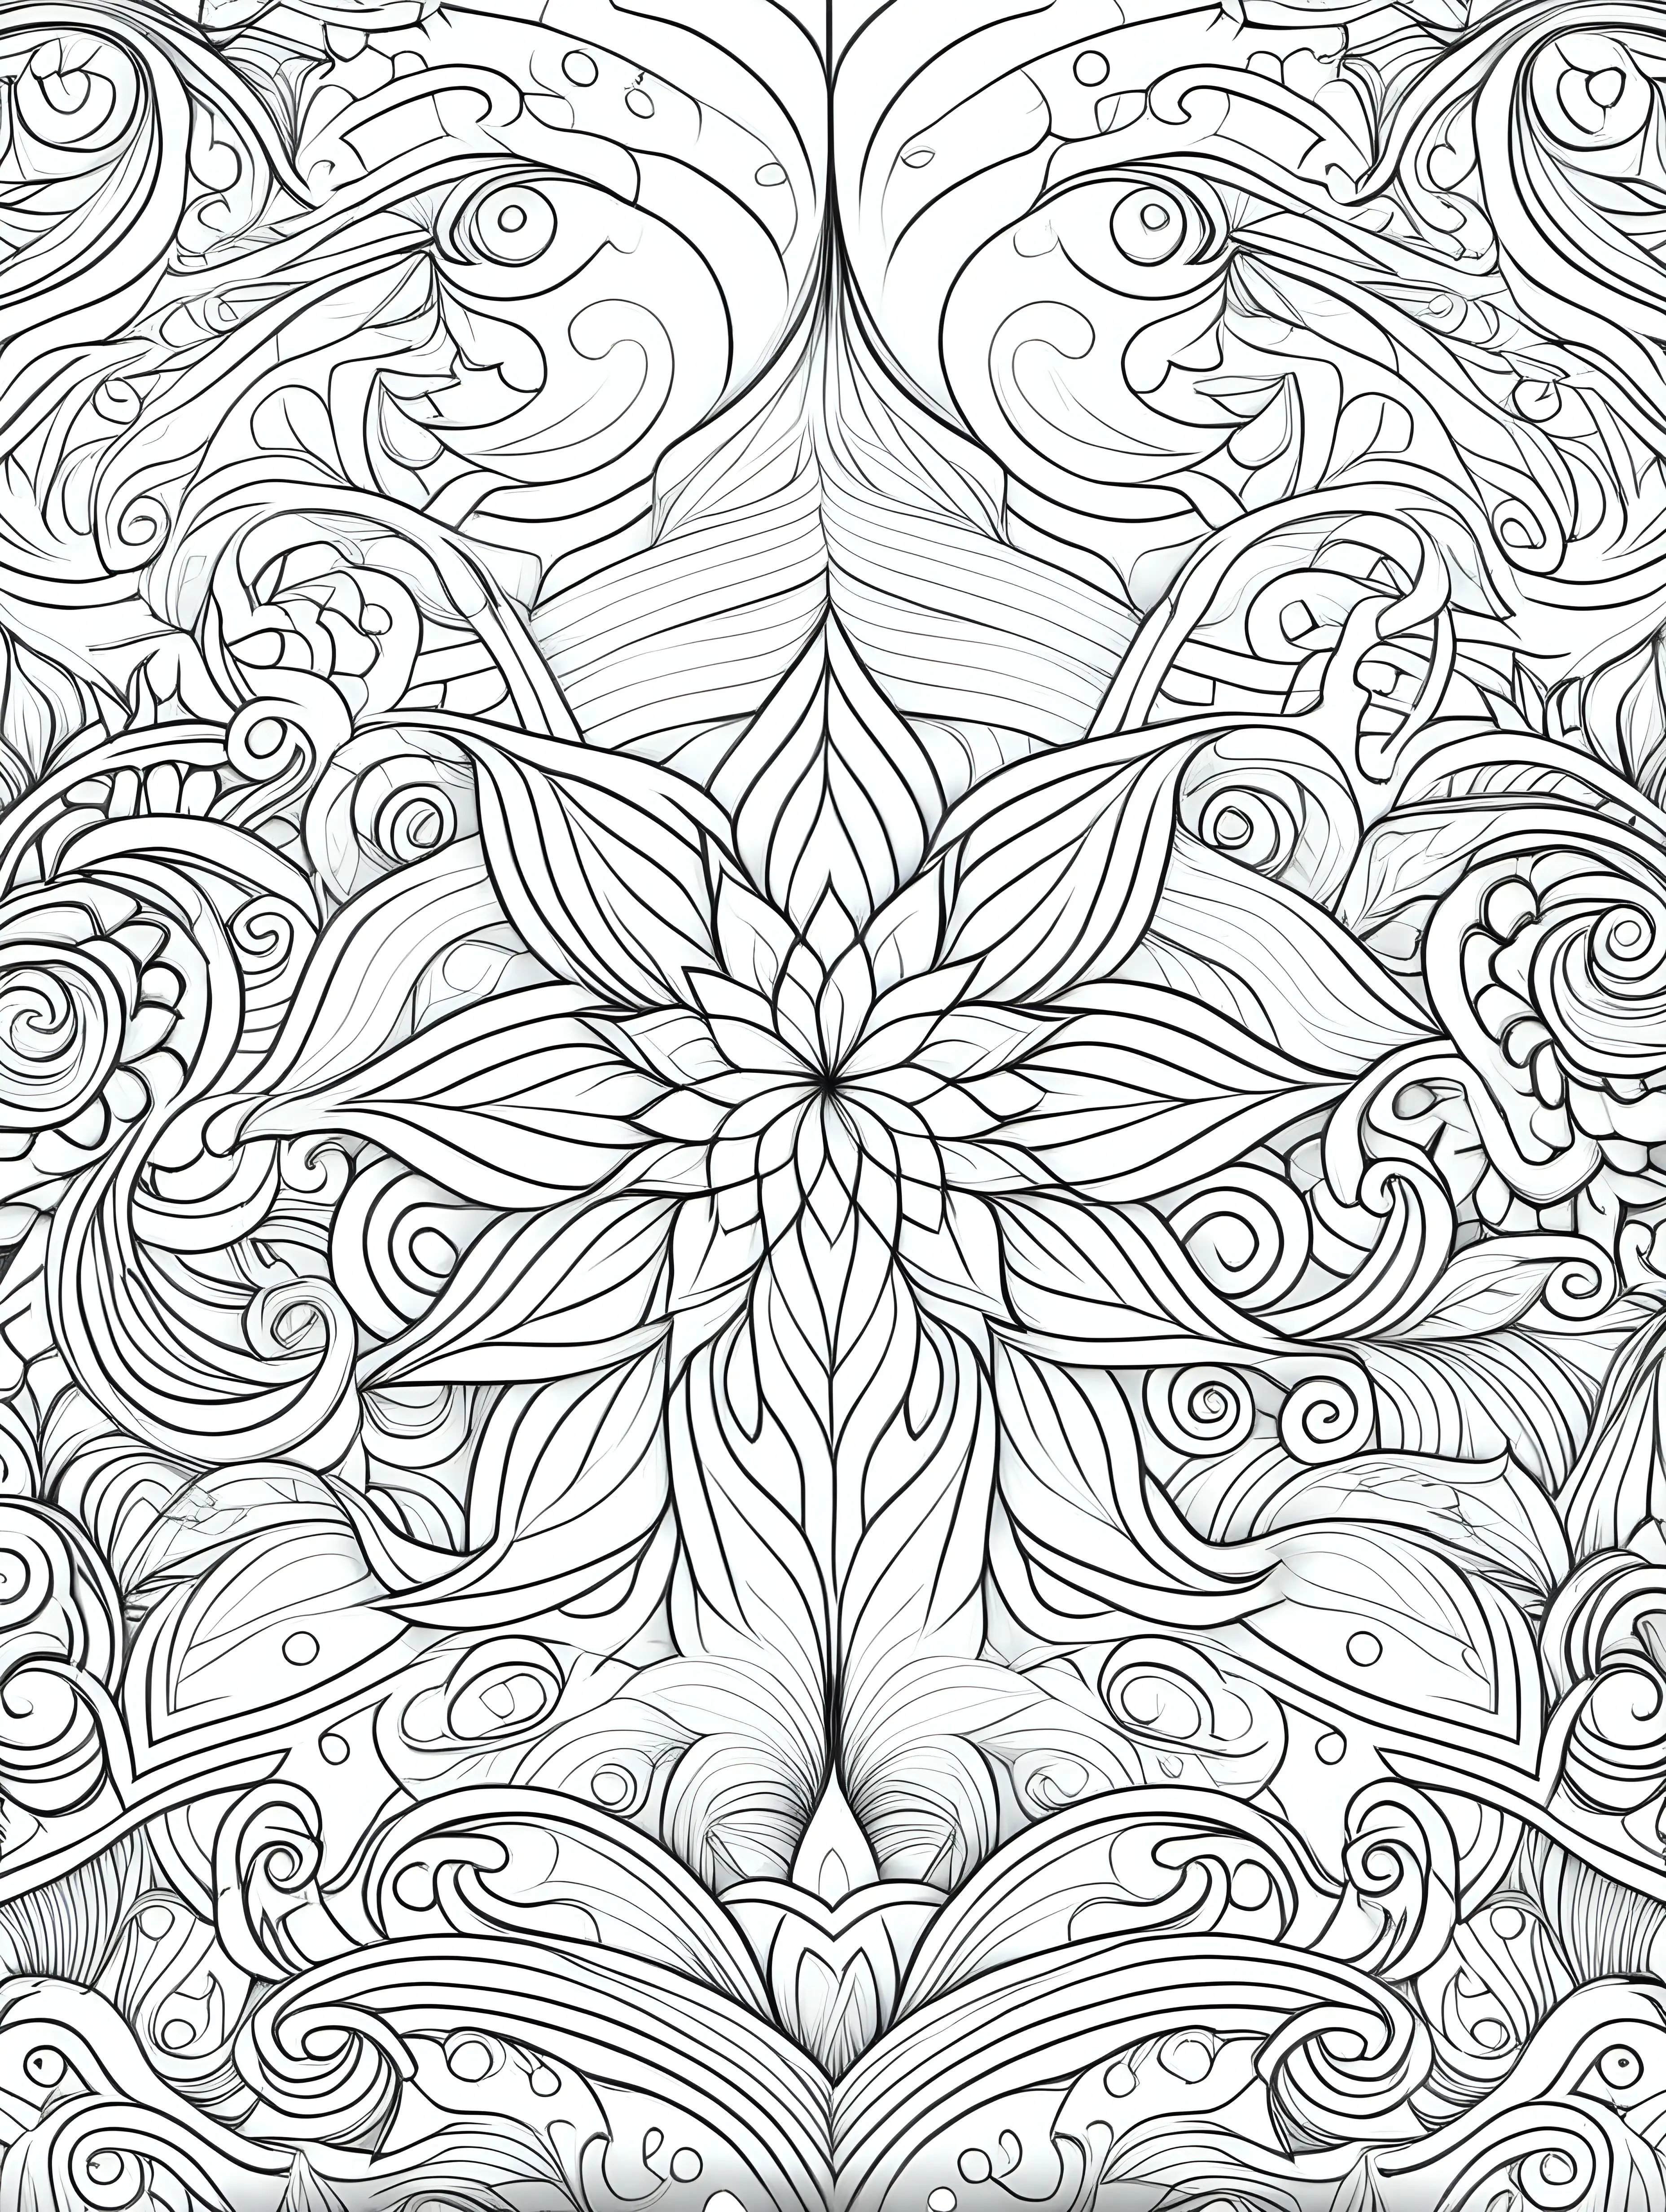 create a seamless magical pattern outline on a white clear background for a adult coloring book